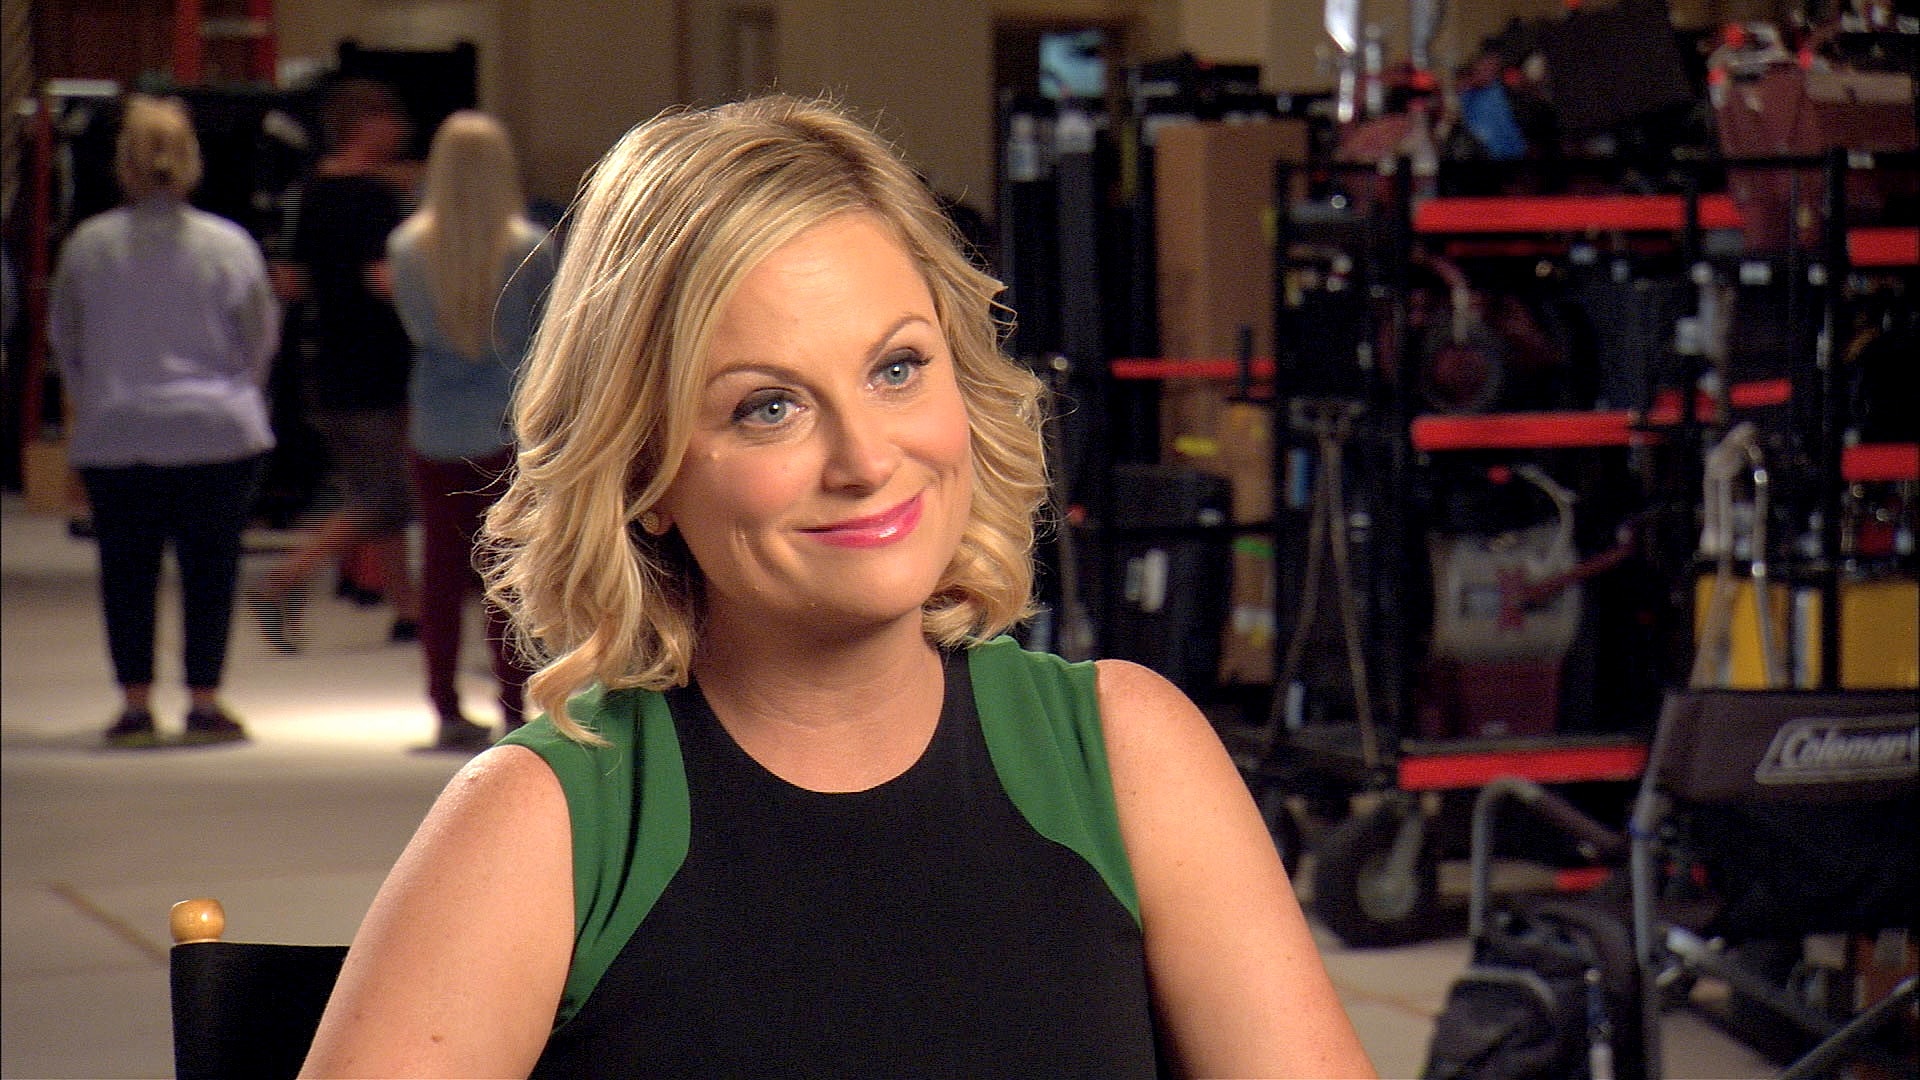 Watch Parks And Recreation Interview Amy Poehler Talks Season 6 NBCcom.